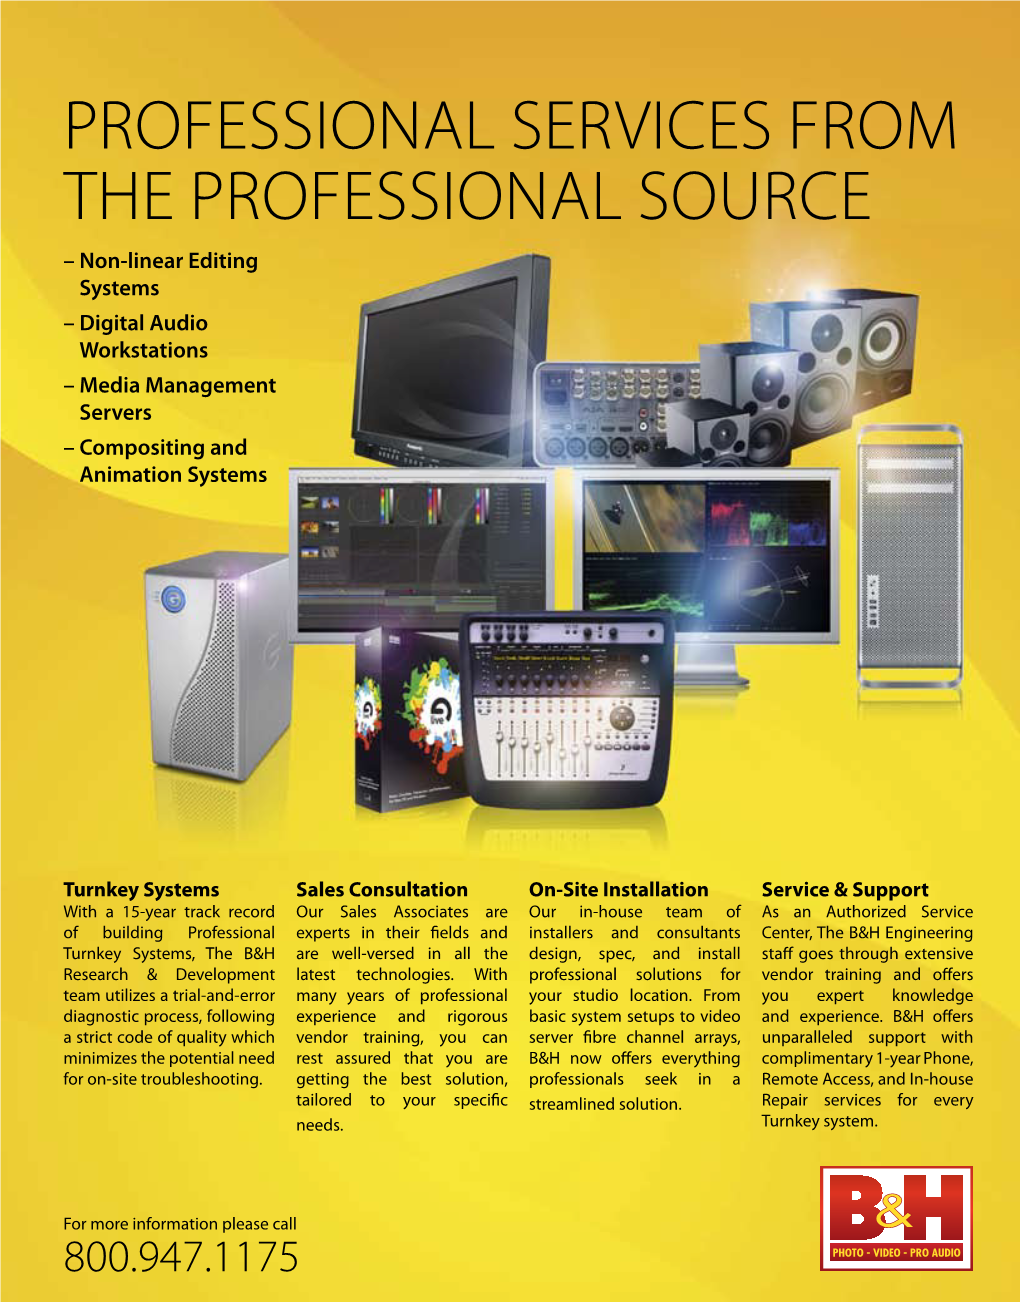 Professional Services from the Professional Source